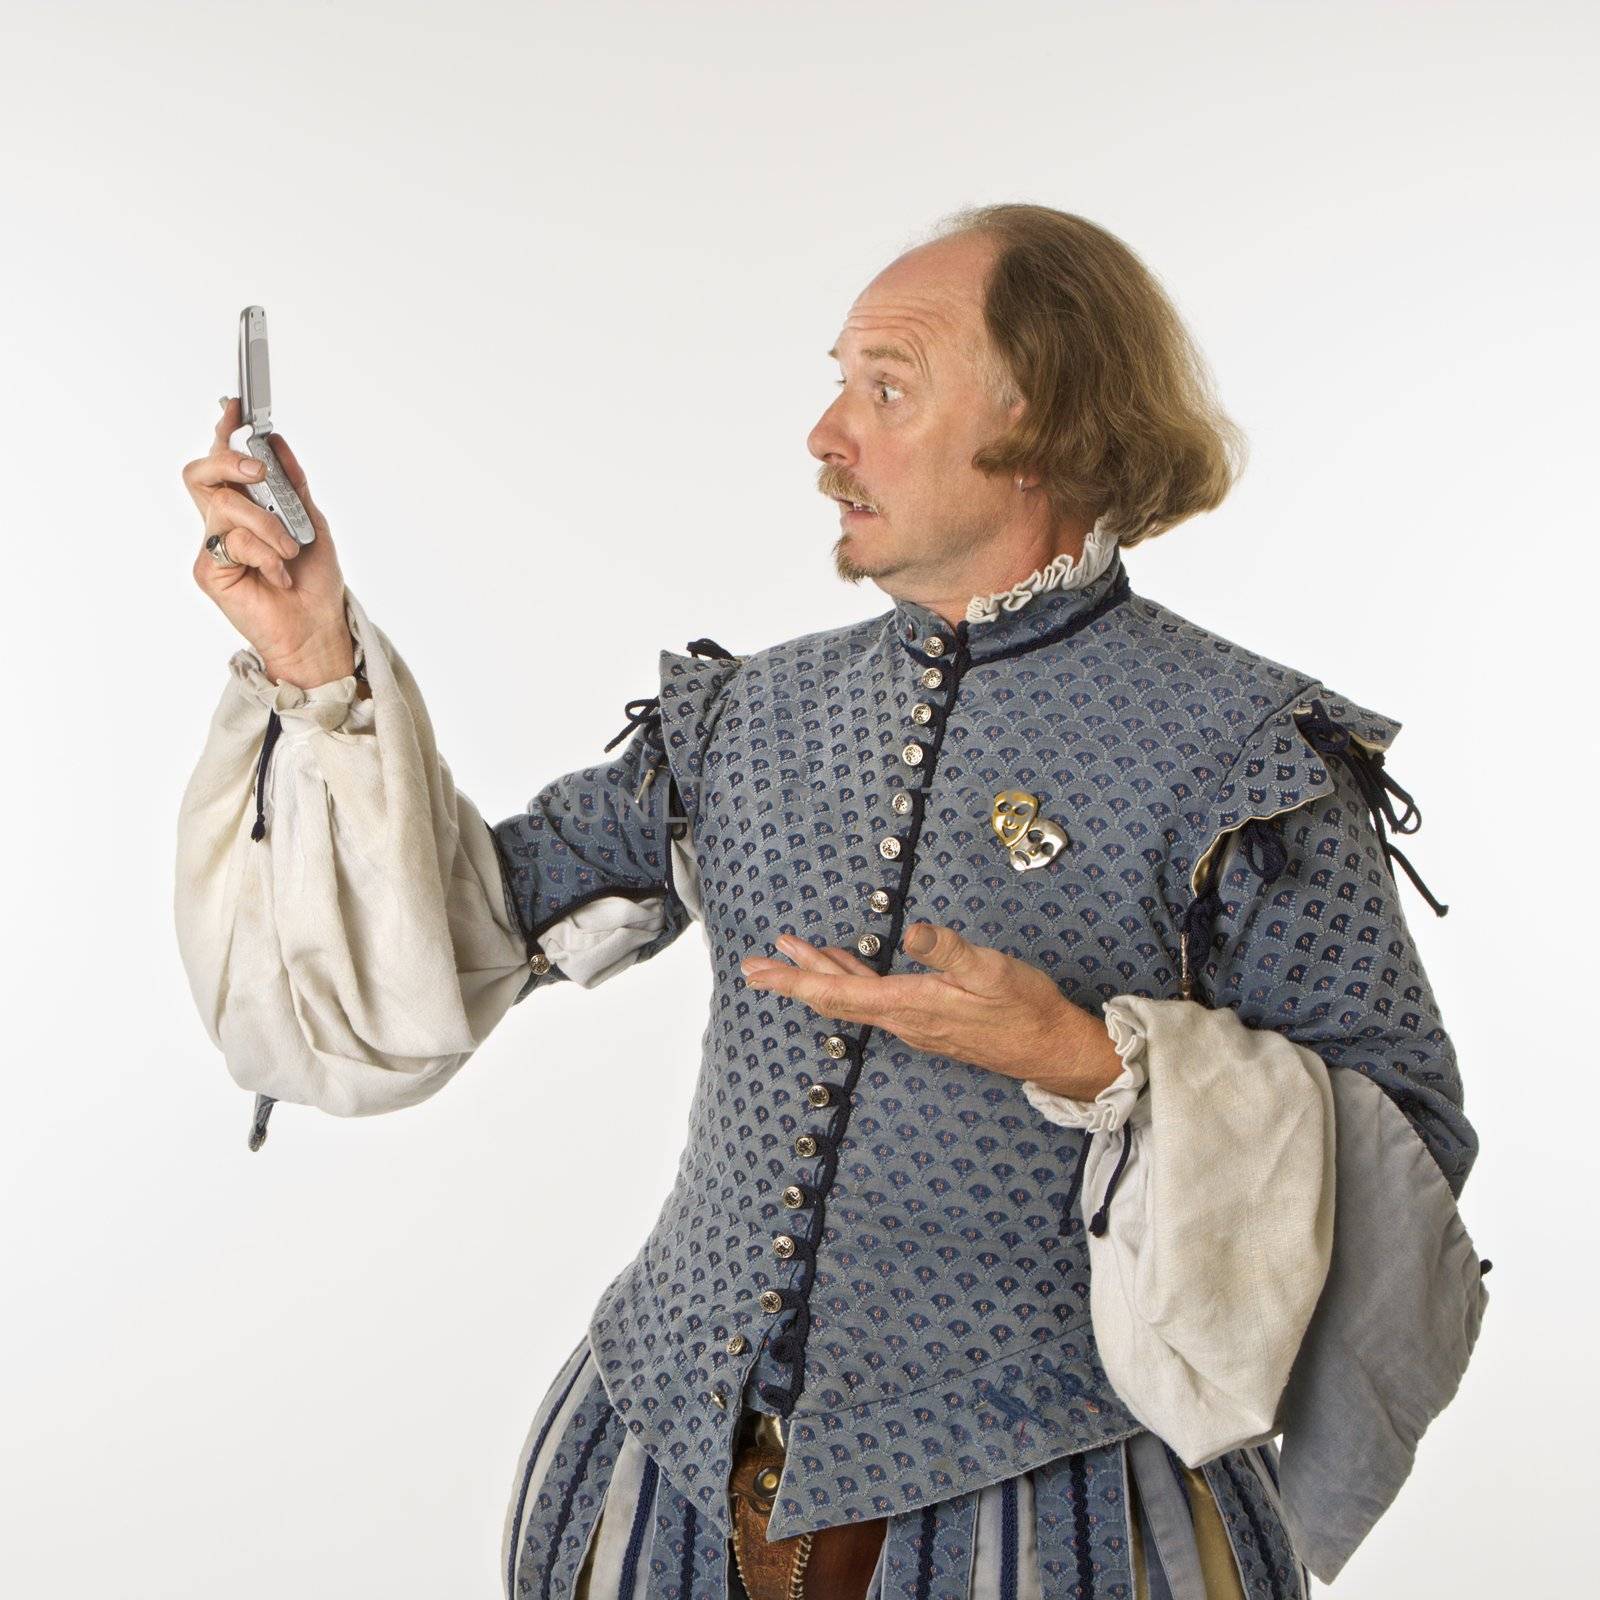 William Shakespeare in period clothing looking at cell phone with astonishment.